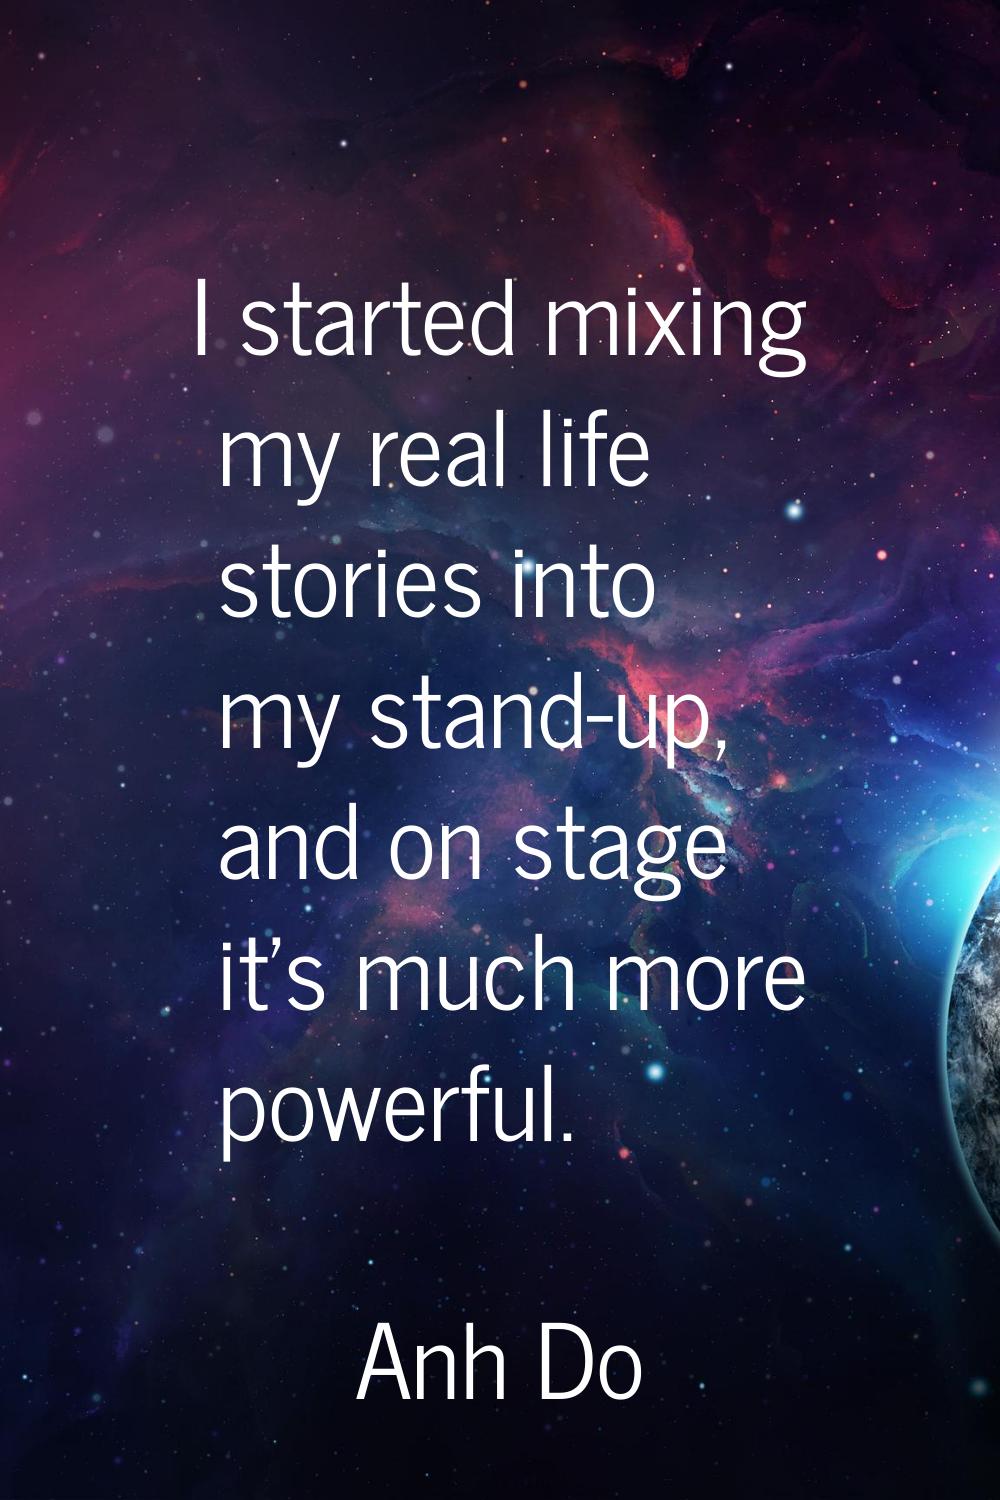 I started mixing my real life stories into my stand-up, and on stage it's much more powerful.